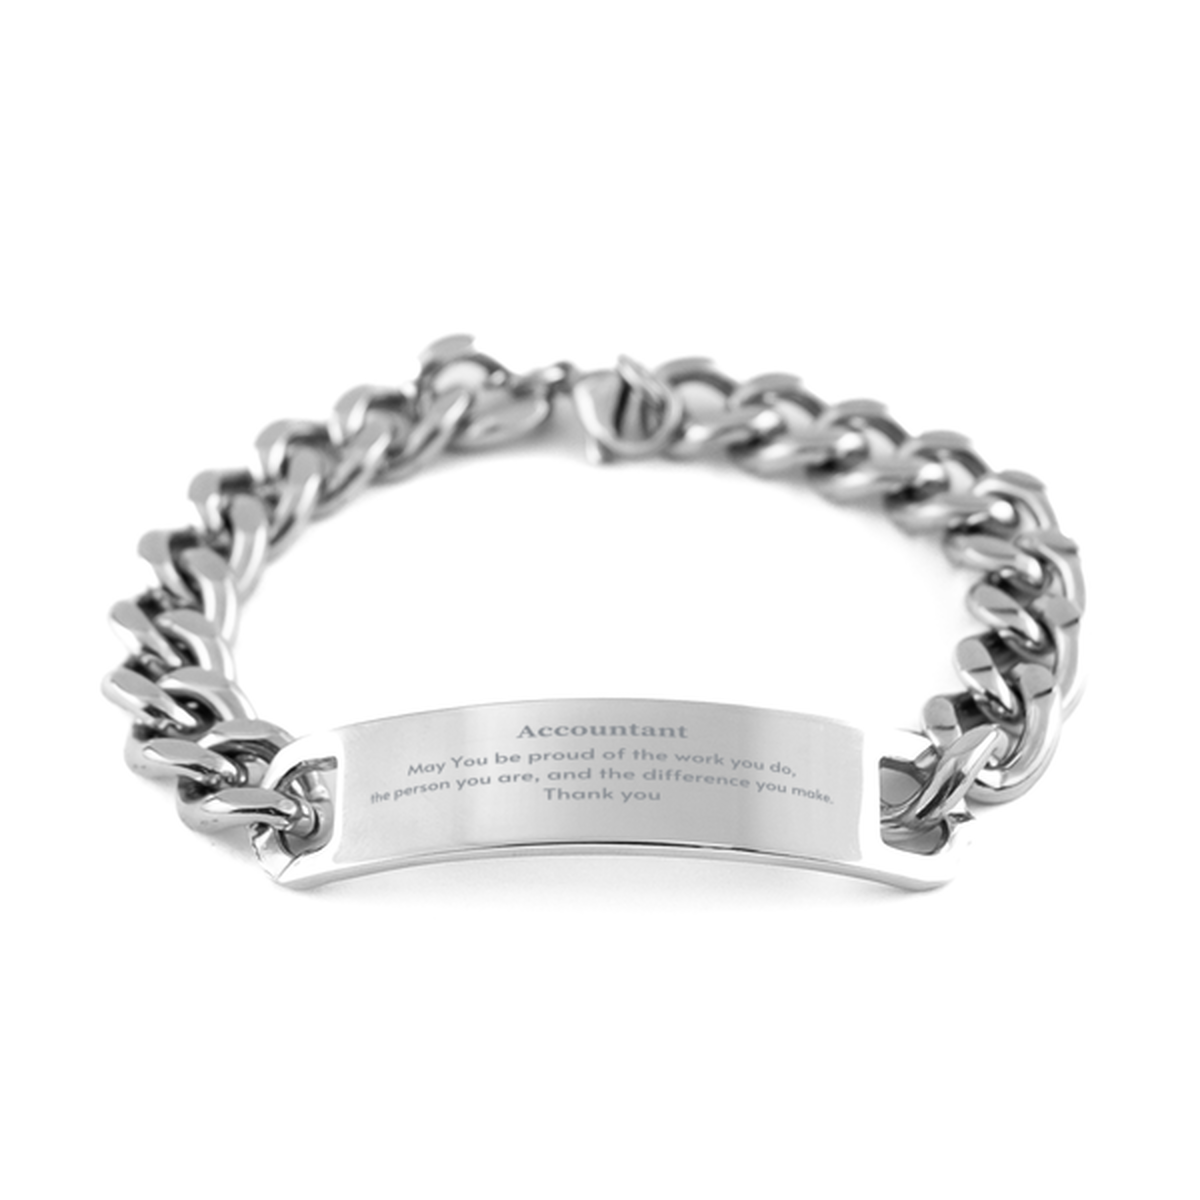 Heartwarming Cuban Chain Stainless Steel Bracelet Retirement Coworkers Gifts for Accountant, Accountant May You be proud of the work you do, the person you are Gifts for Boss Men Women Friends